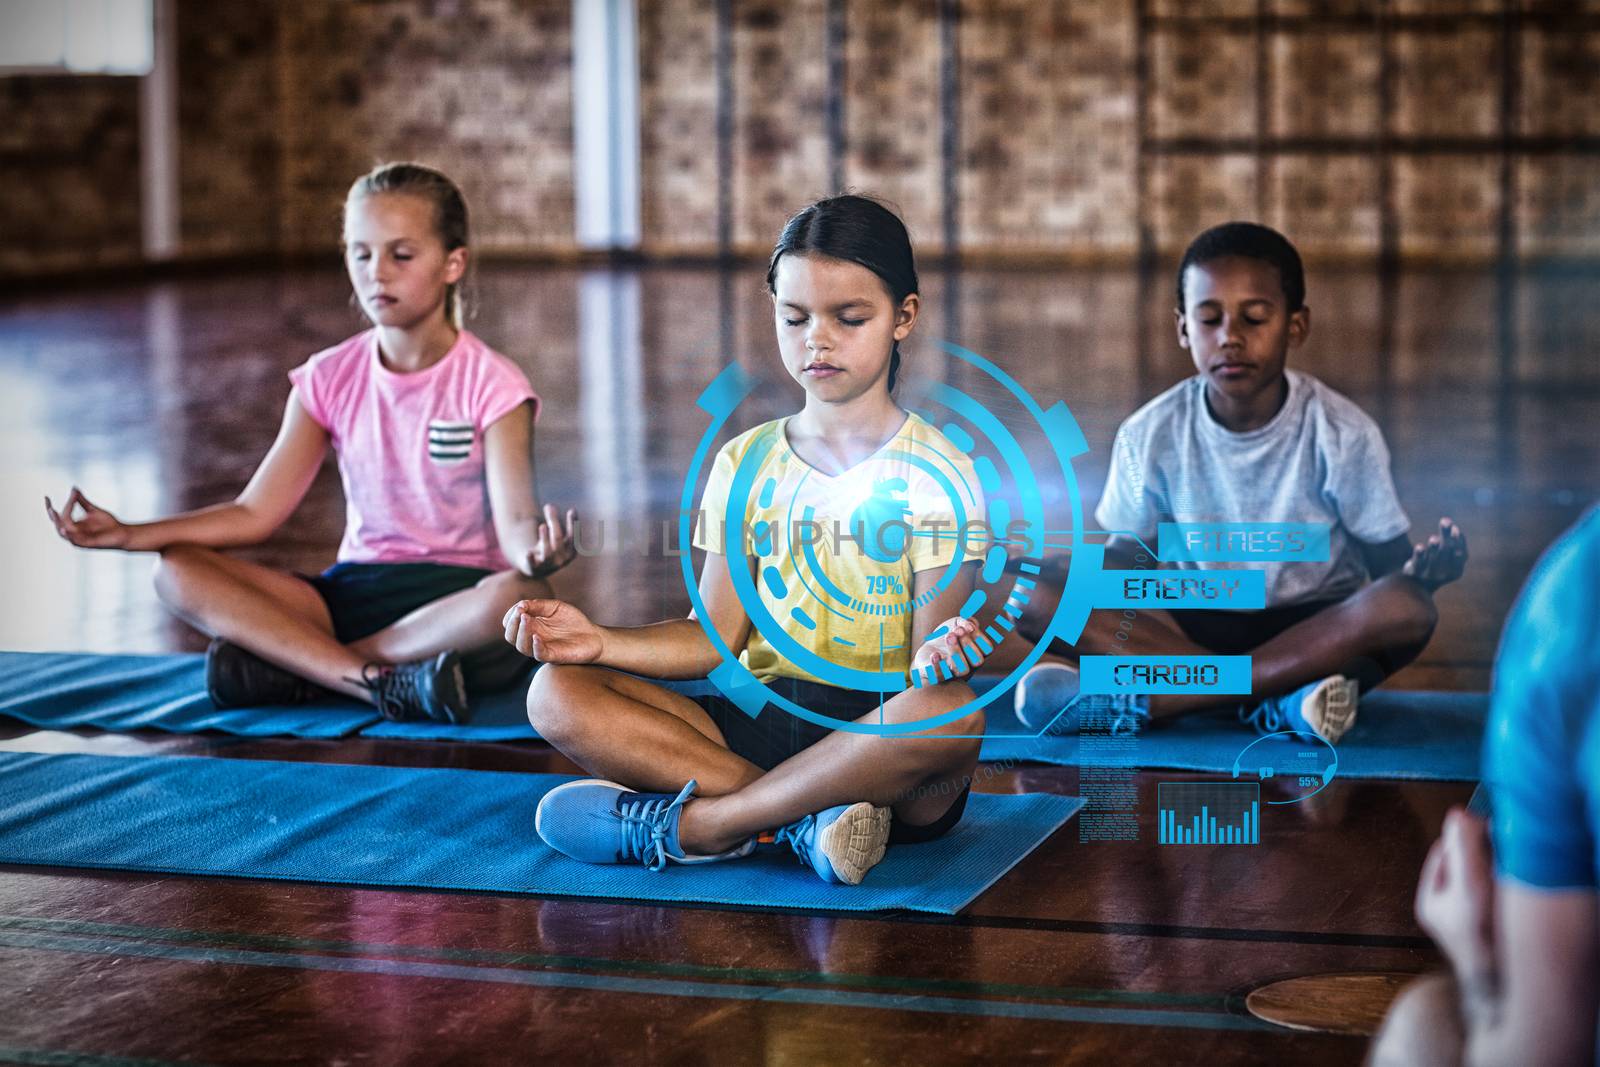 Fitness interface against school kids meditating during yoga class